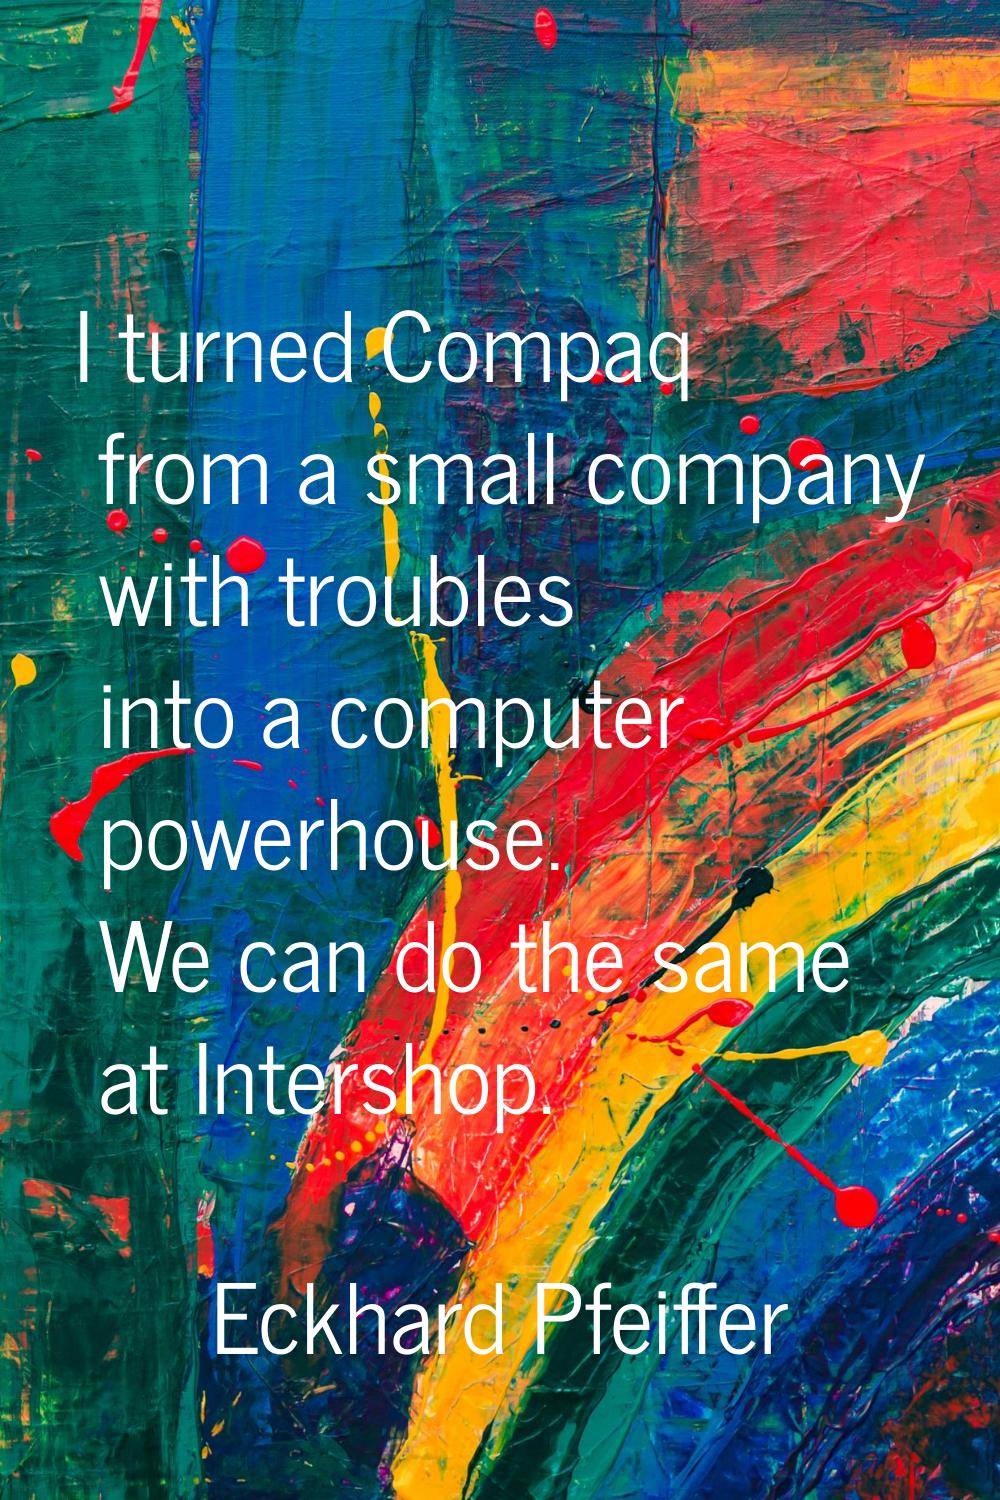 I turned Compaq from a small company with troubles into a computer powerhouse. We can do the same a